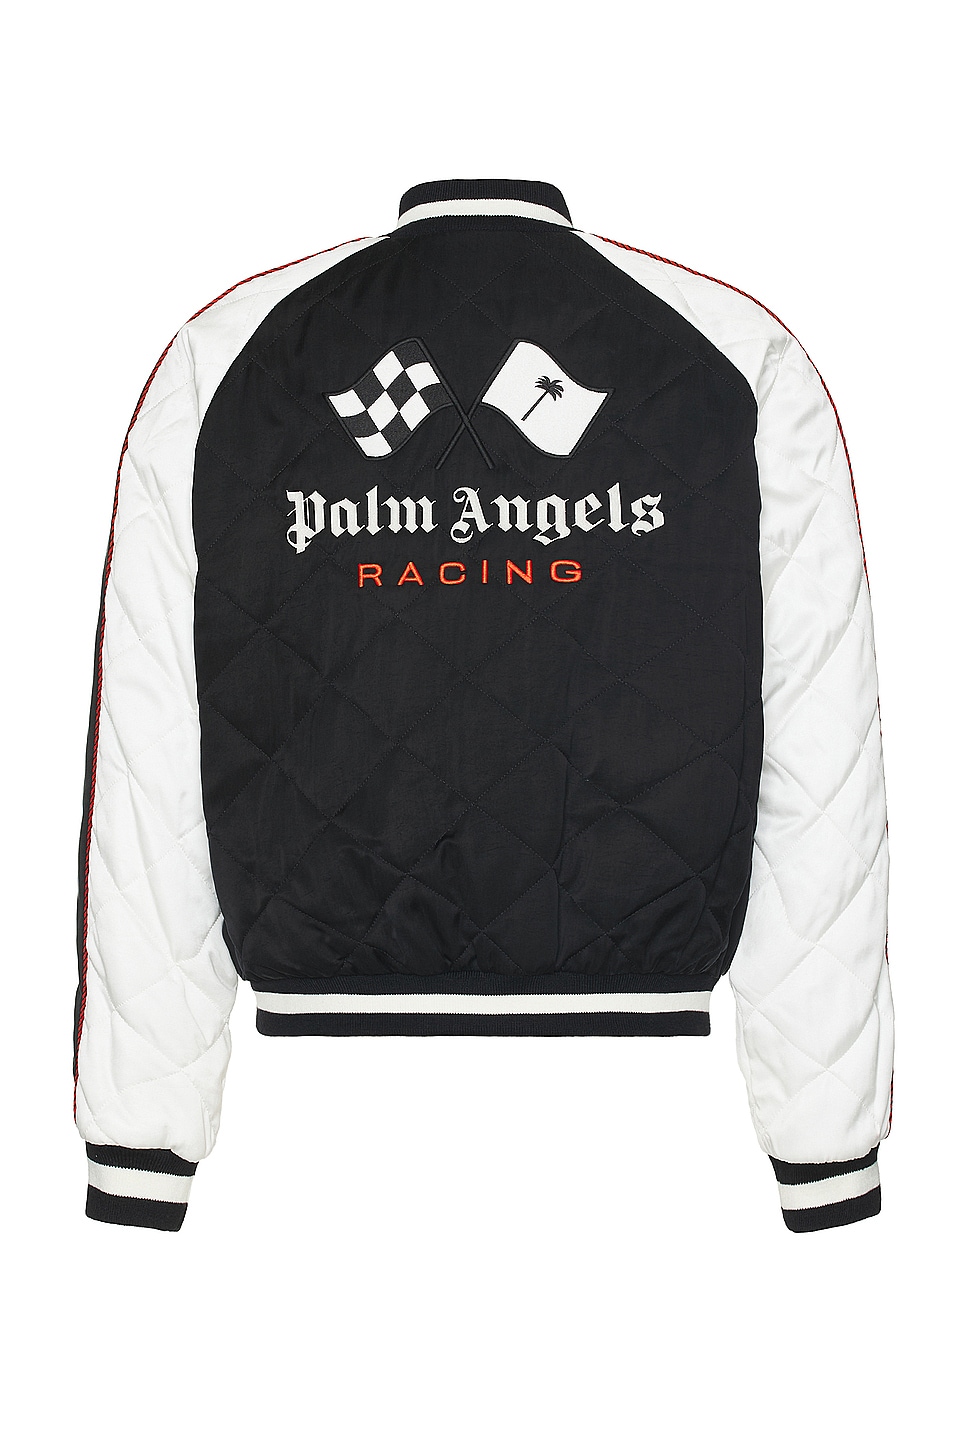 Image 1 of Palm Angels X Formula 1 Racing Souvenir Jacket in Black, White, & Red